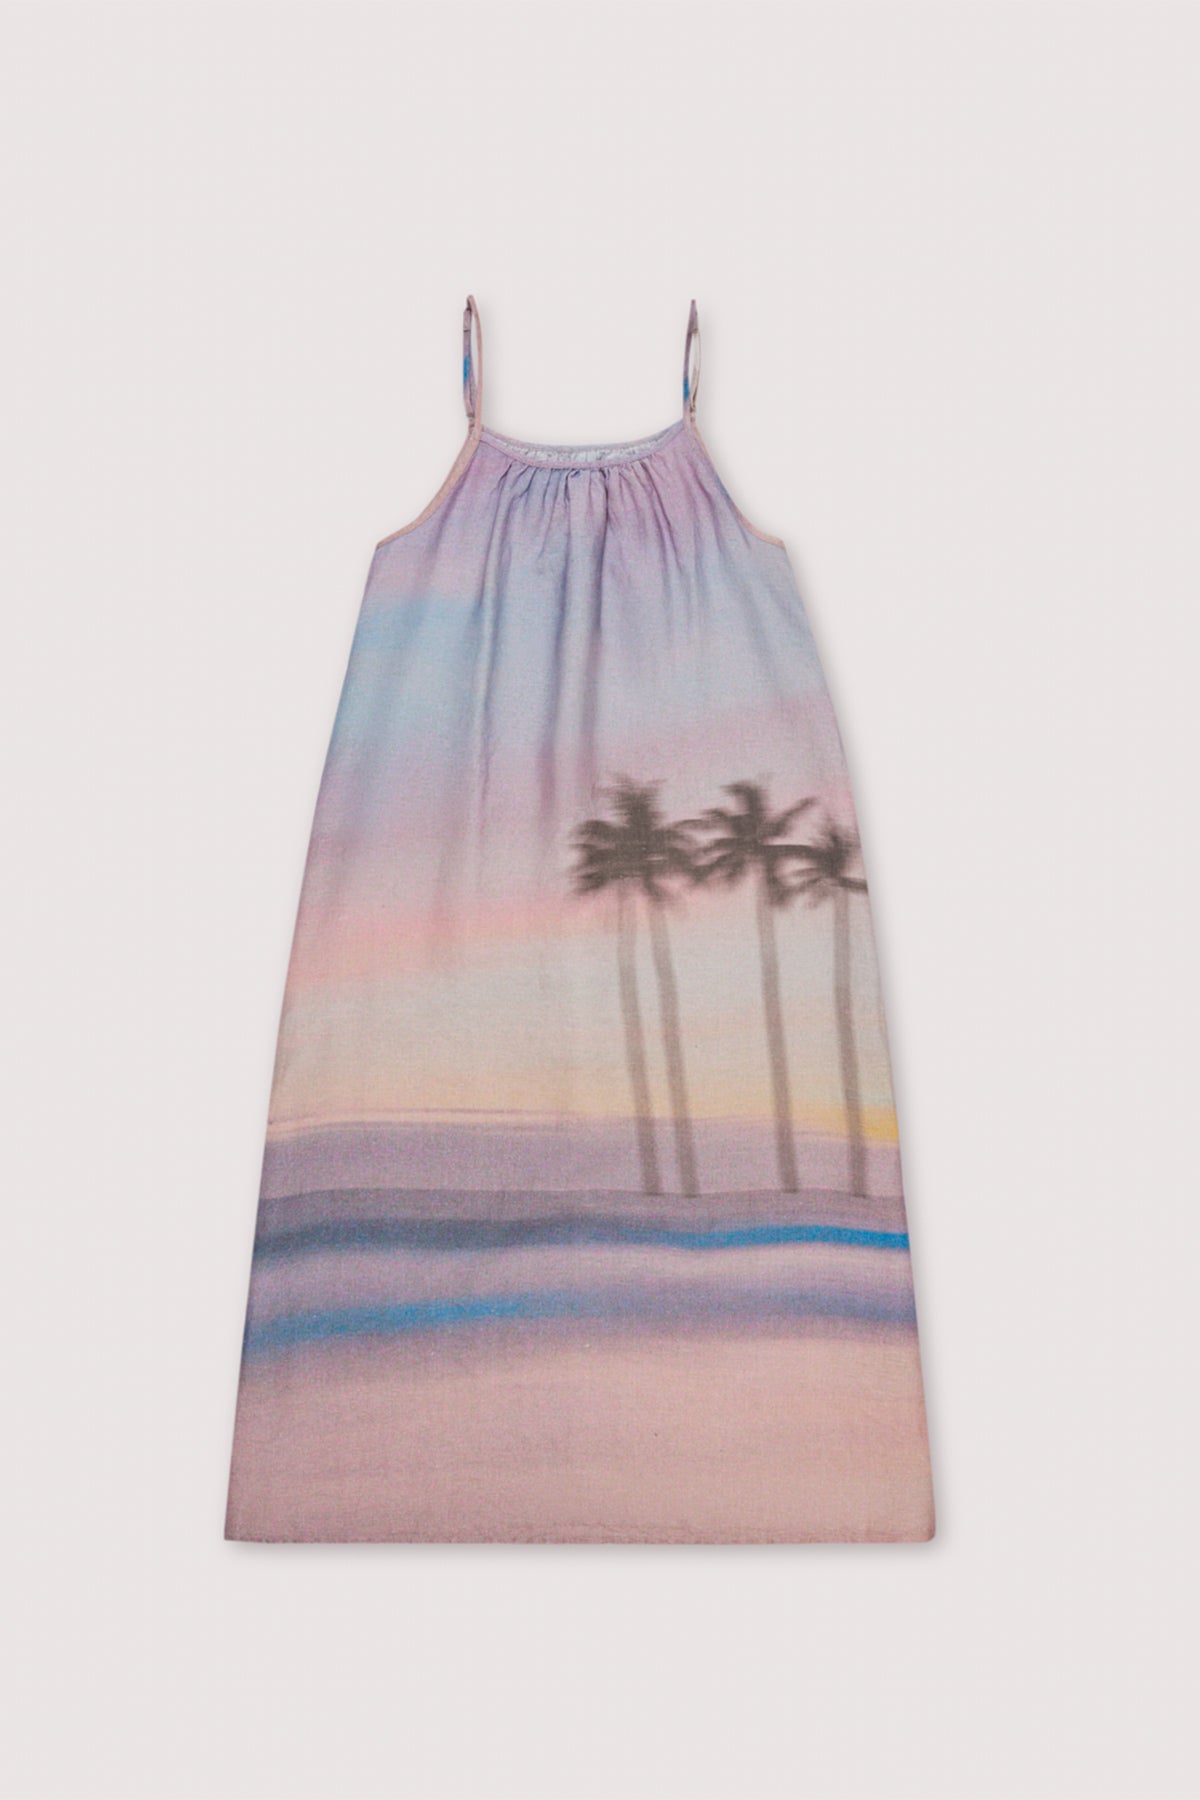 STRAPPY DRESS "SUNSET" MULTICOLOR